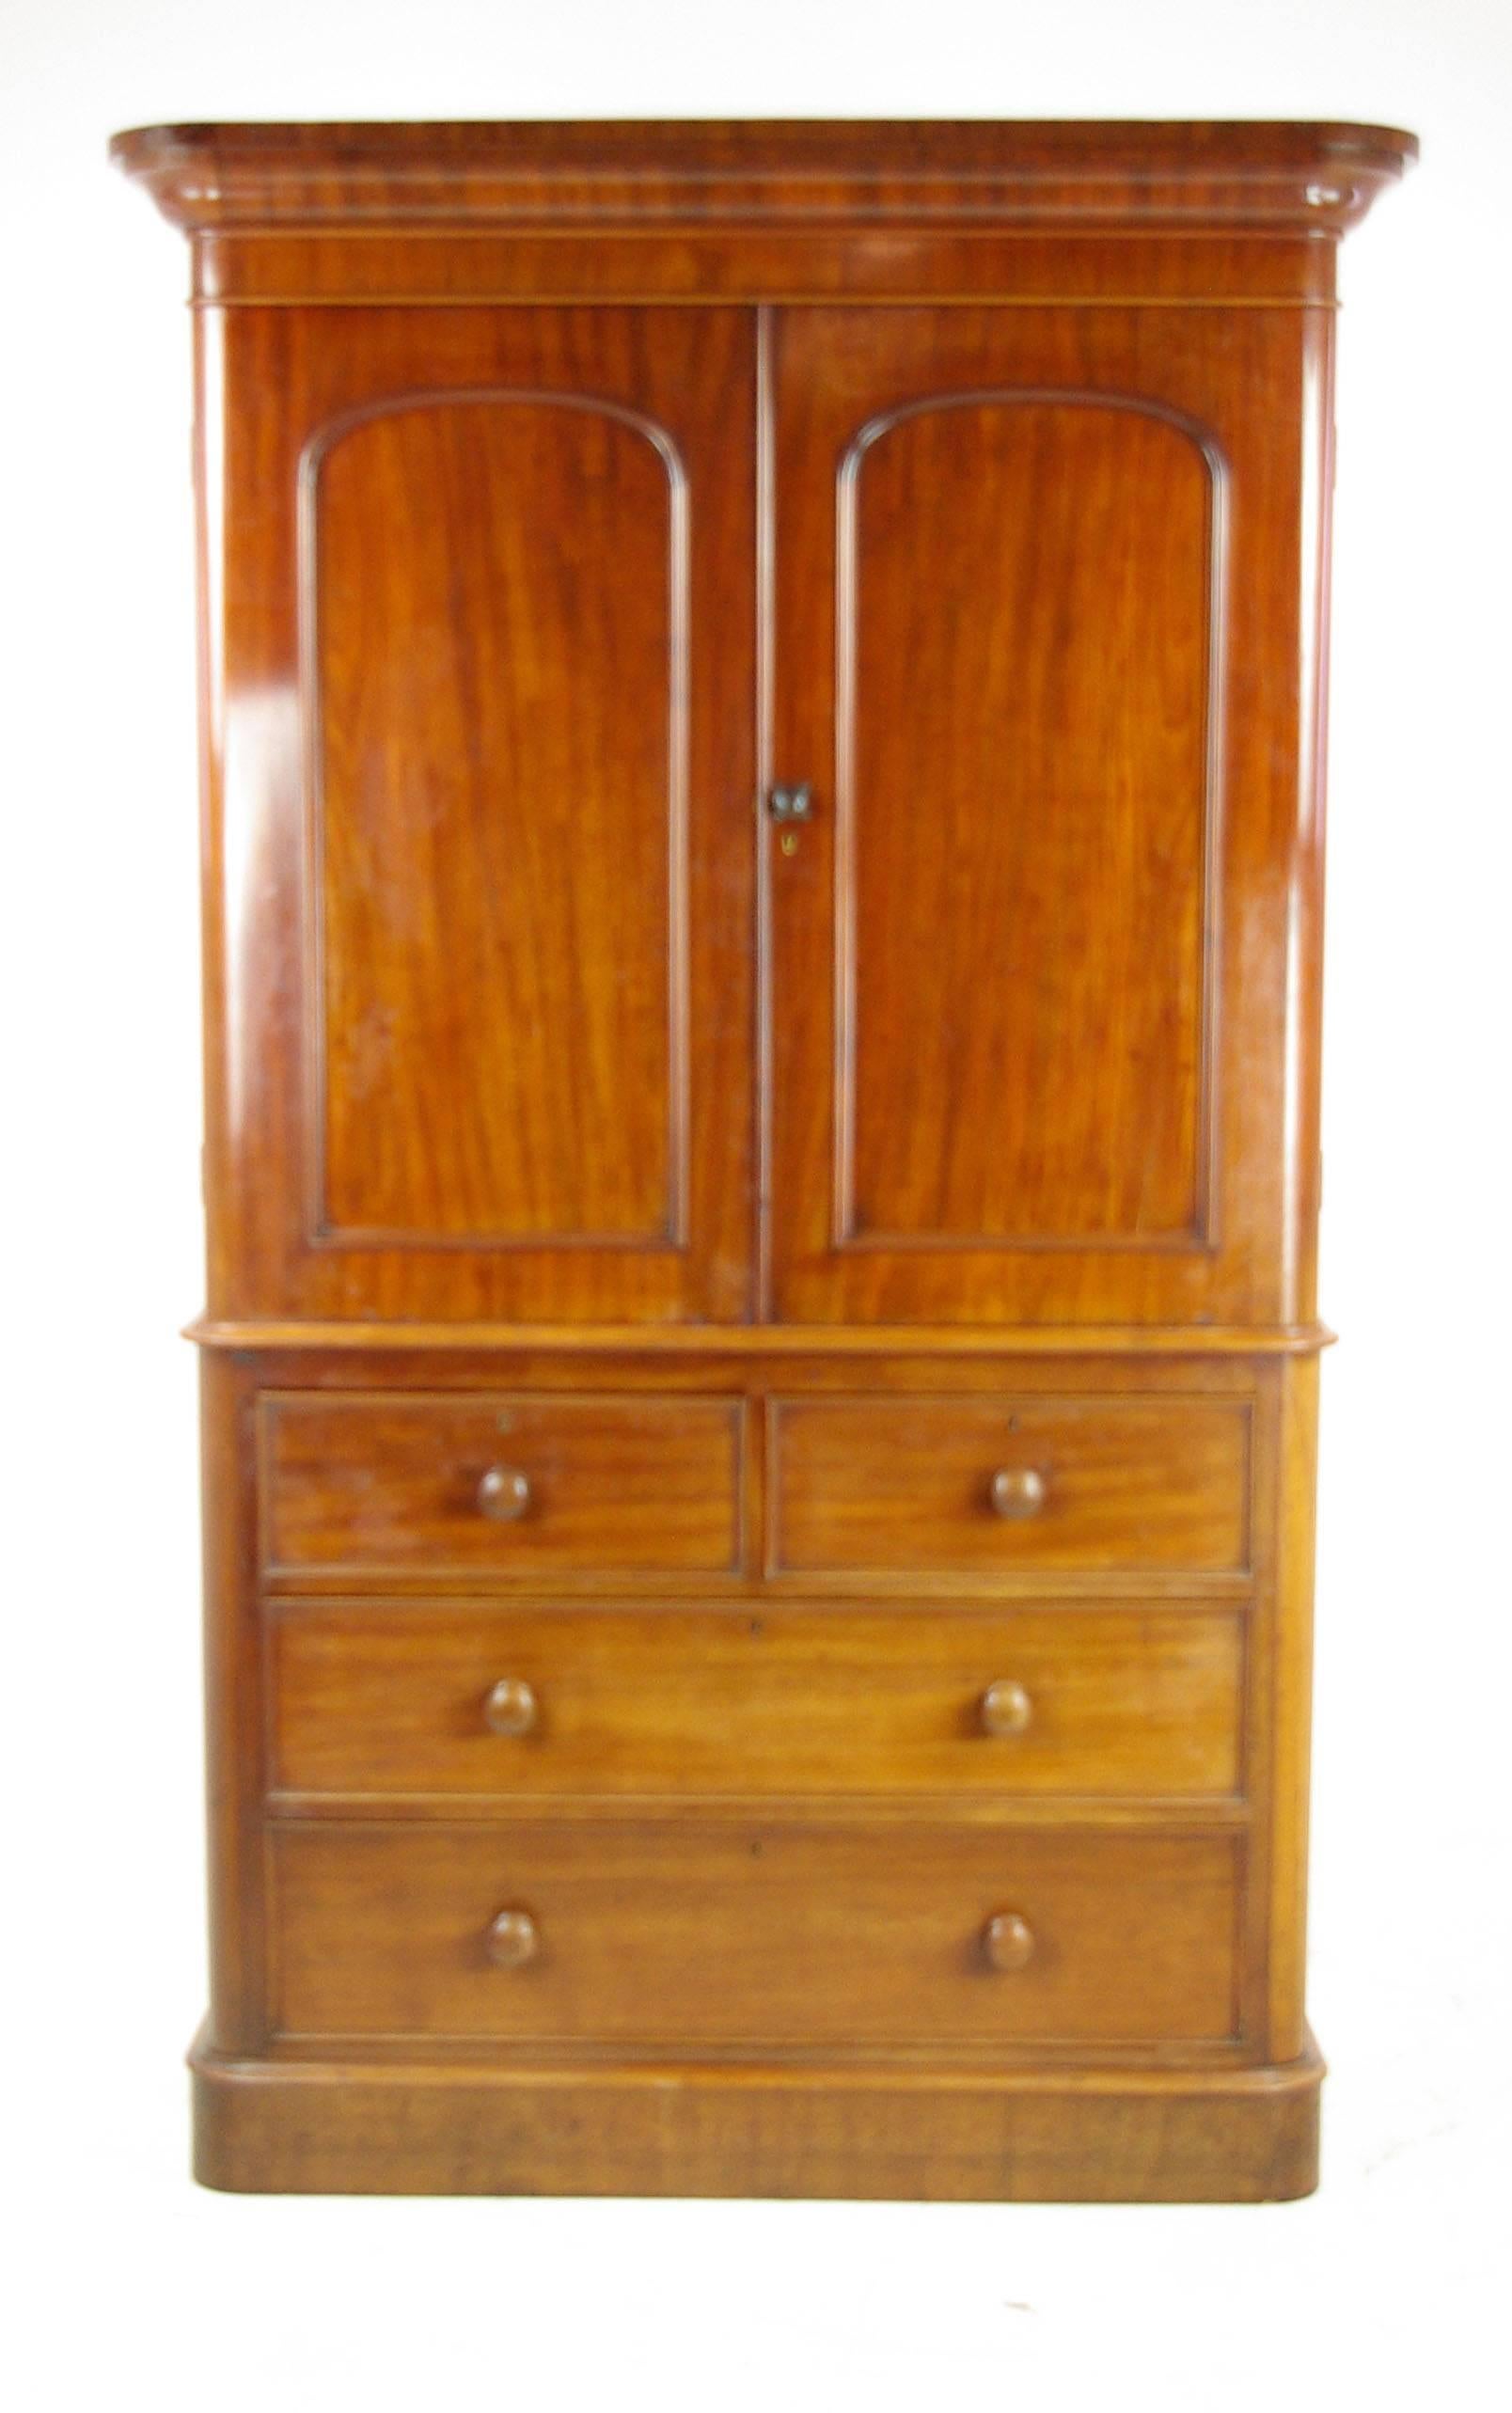 Antique mahogany linen press, Scotland 1860, antique furniture, B1038

Scotland, 1860
Solid mahogany and veneers
Original finish
Molded rounded cornice above
Two well figured paneled doors
Enclosing four original linen slides (drawers)
Below